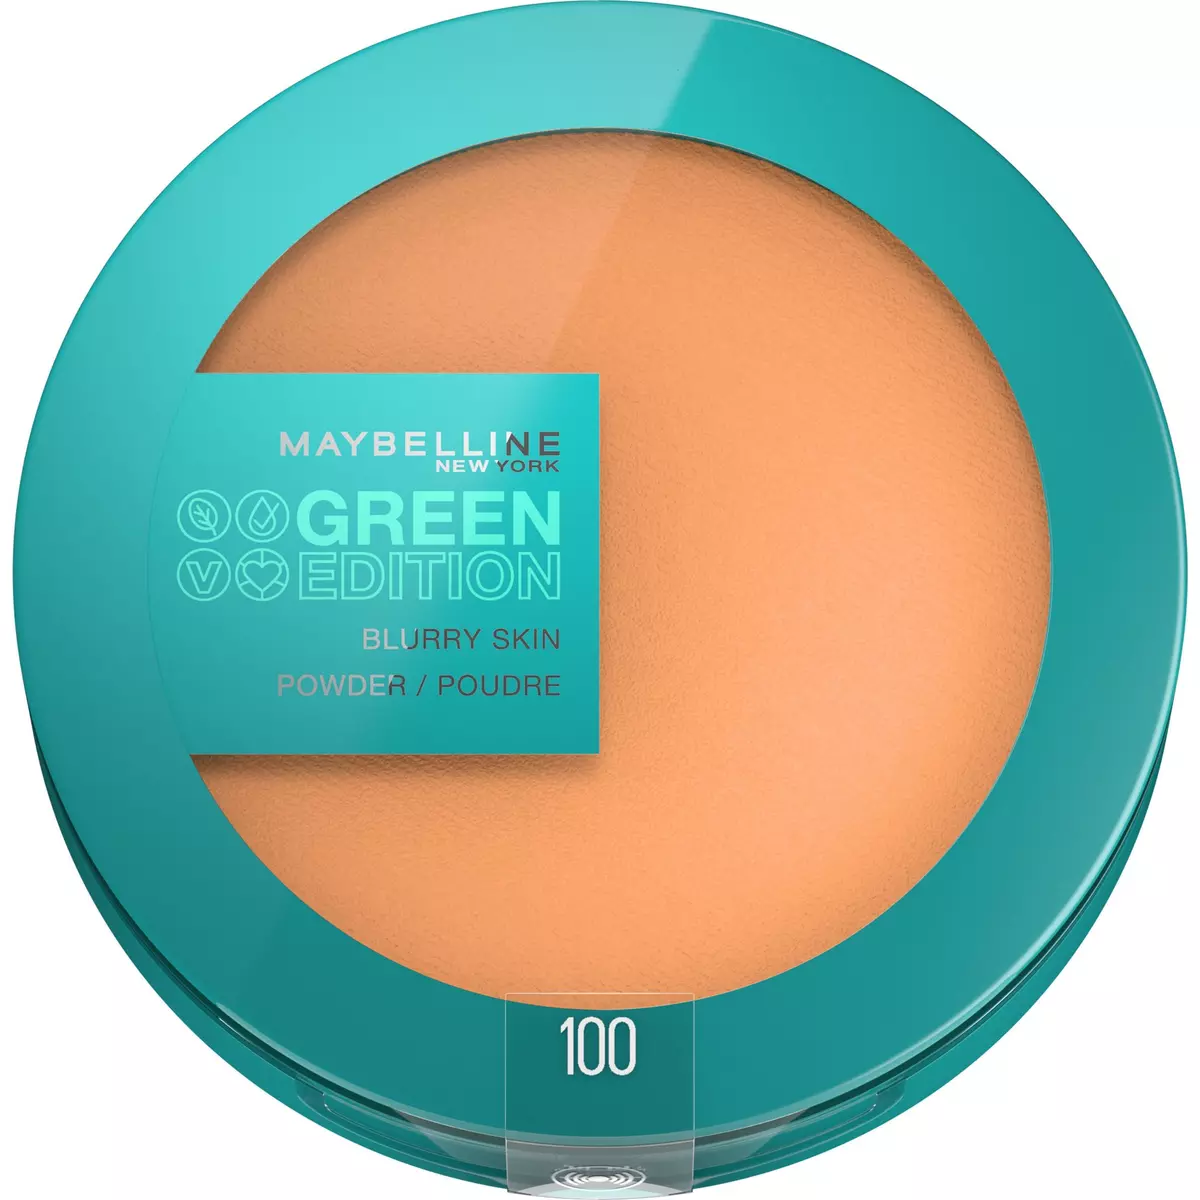 MAYBELLINE Green Edition Poudre teint 100 1 pièce